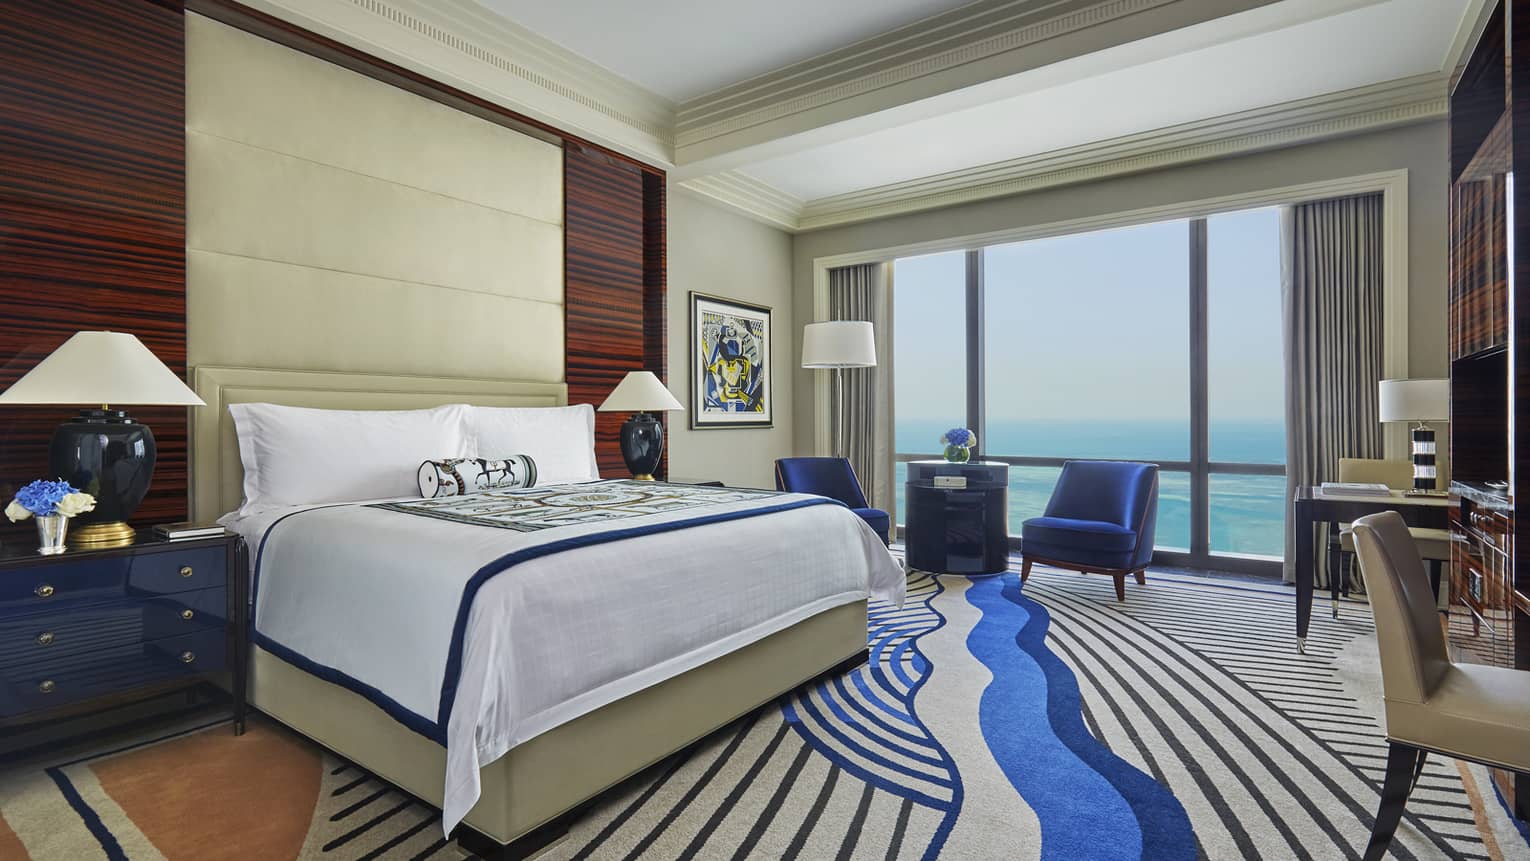 Premier Room bed with tall padded headboard, modern carpet with blue swirl design, floor-to-ceiling window with Arabian Gulf view